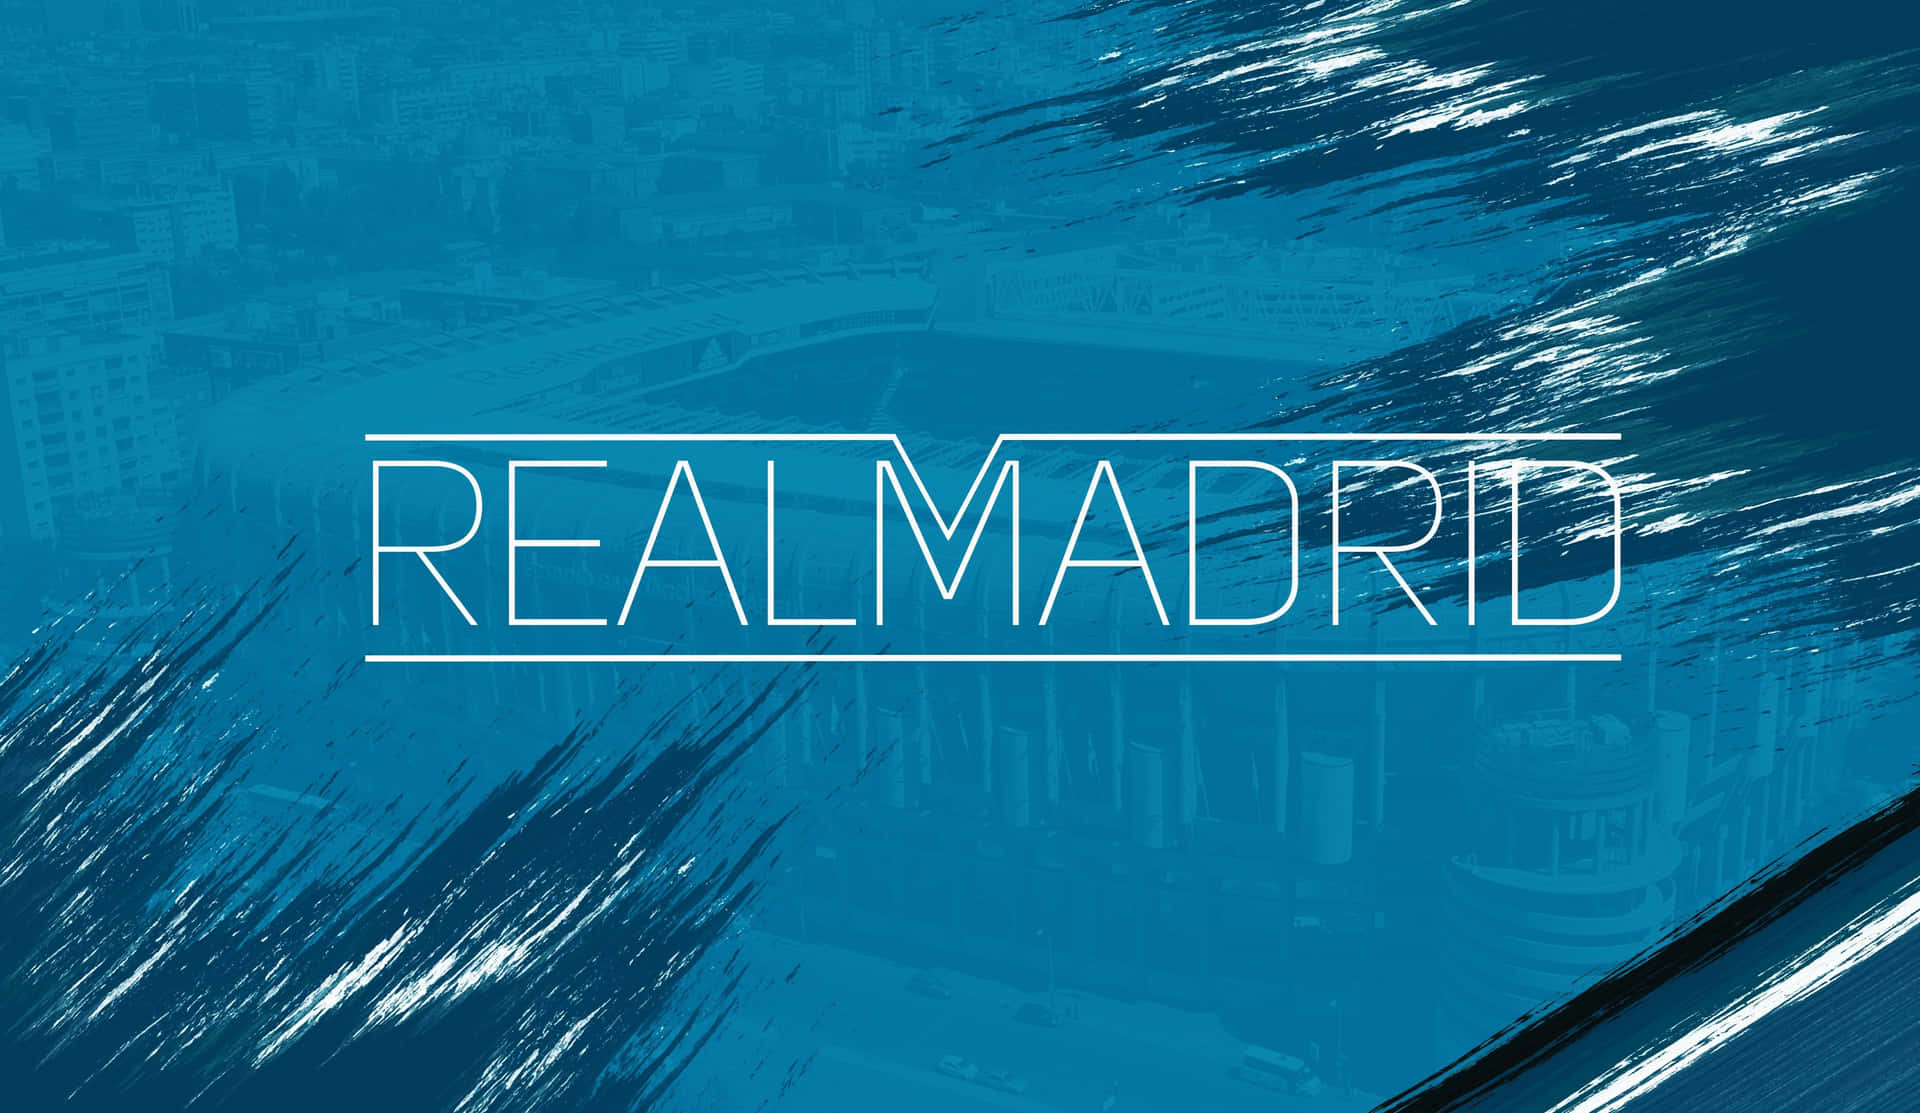 Real Madrid Background Wallpaper